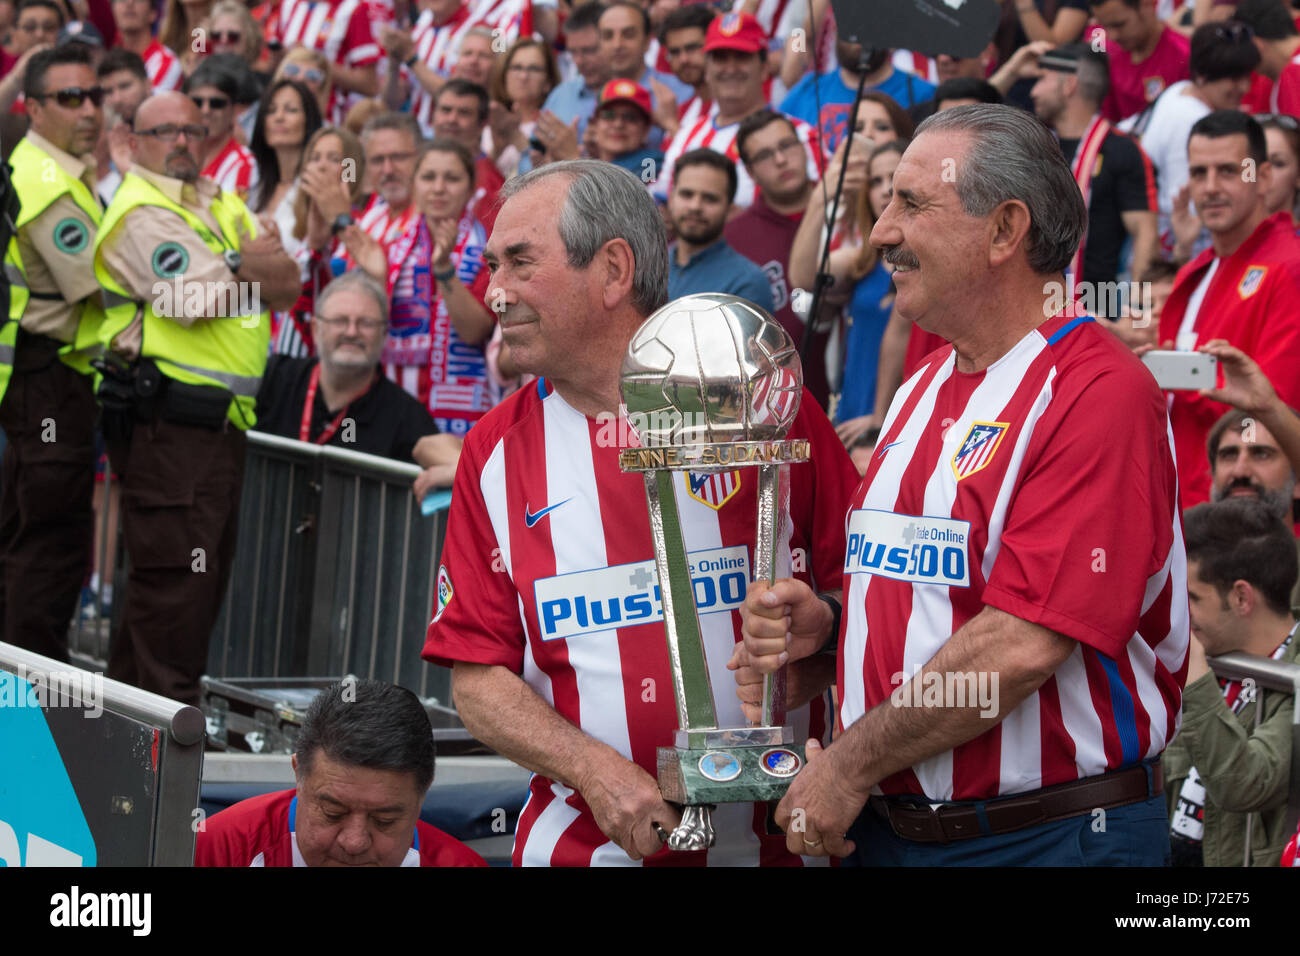 Madrid, Spain. 21st May, 2017. The Intercontinental Cup (C), holds by two players who wons it in 1974. Credit: Jorge Gonzalez/Pacific Press/Alamy Live News Stock Photo